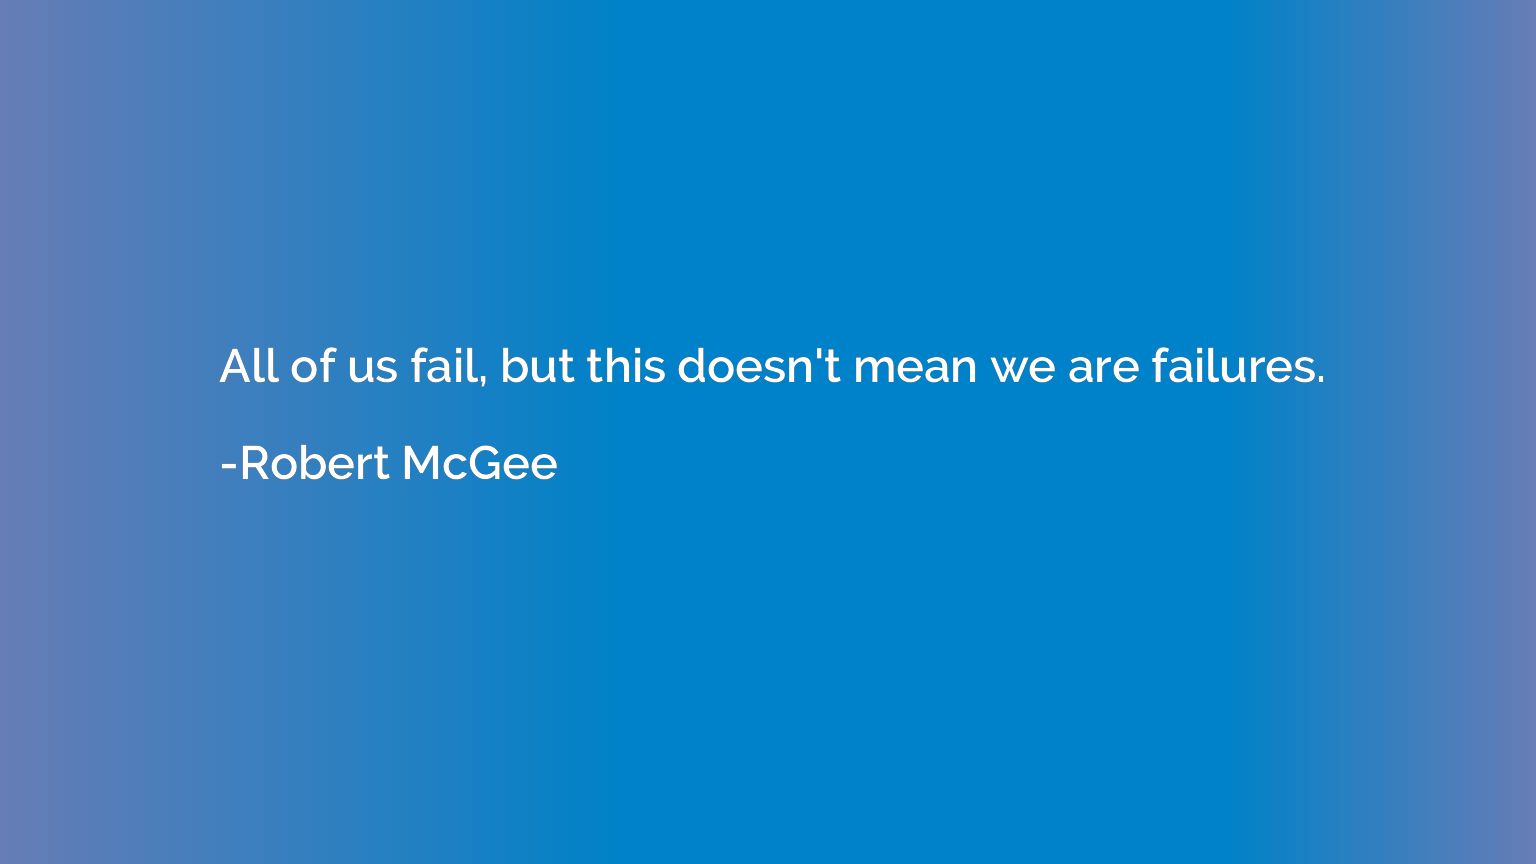 All of us fail, but this doesn't mean we are failures.